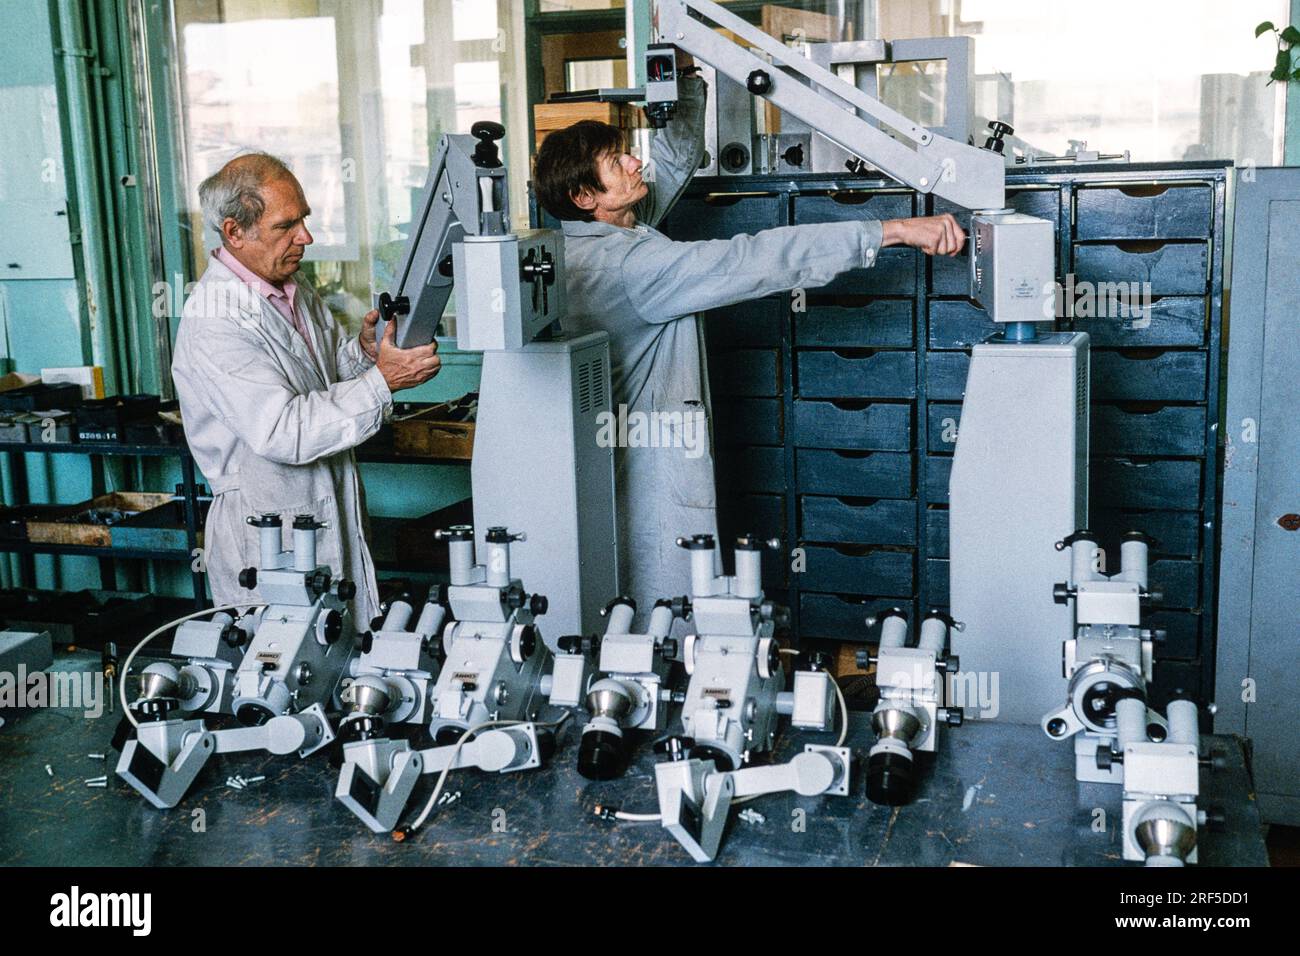 Technicians check optical instruments after assembly at the LOMO Optical Factory, December 10, 1994 in St. Petersburg, Russia. The Leningrad Optical Mechanical Association begun production in 1914 under the Soviet Union and was privatized in 1994 specializing in cameras, telescopes, microscopes and endoscopes. Stock Photo